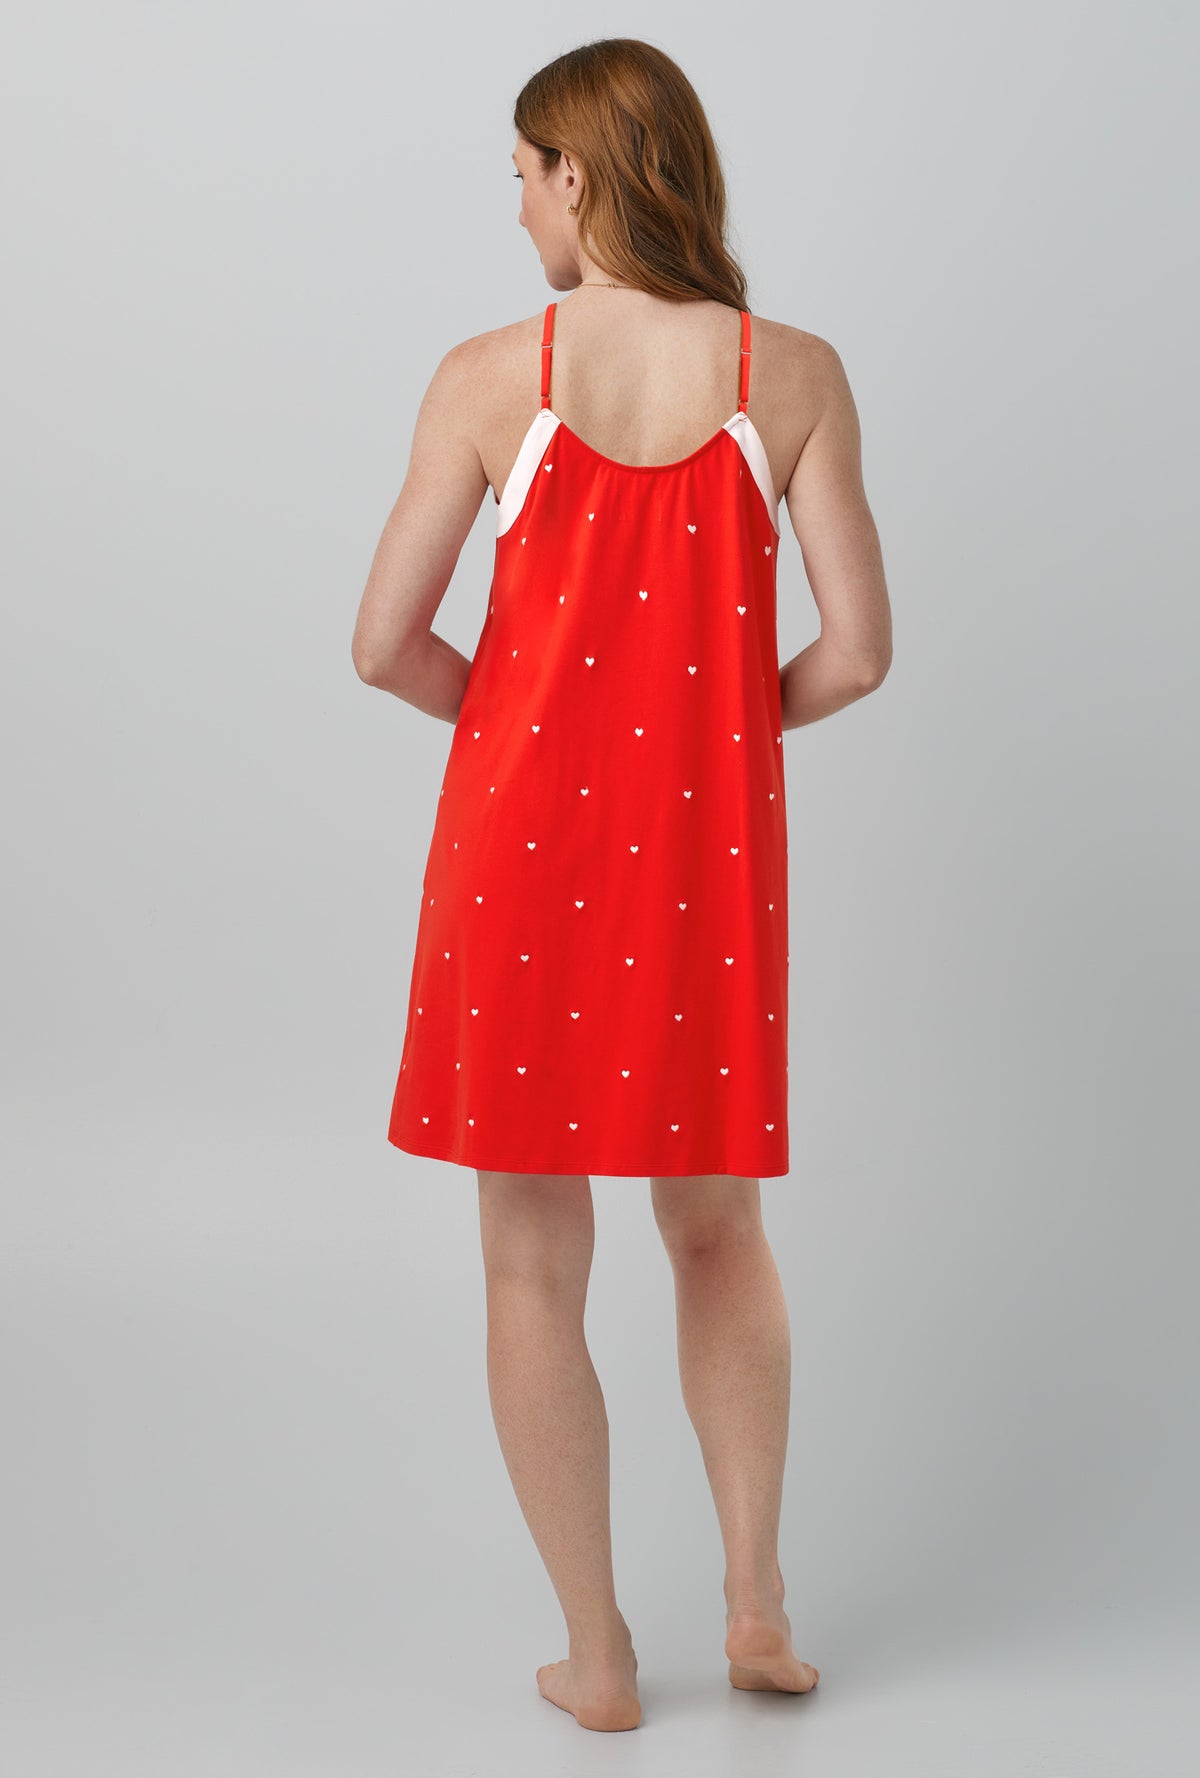 A lady wearing red chemise with tiny hearts print